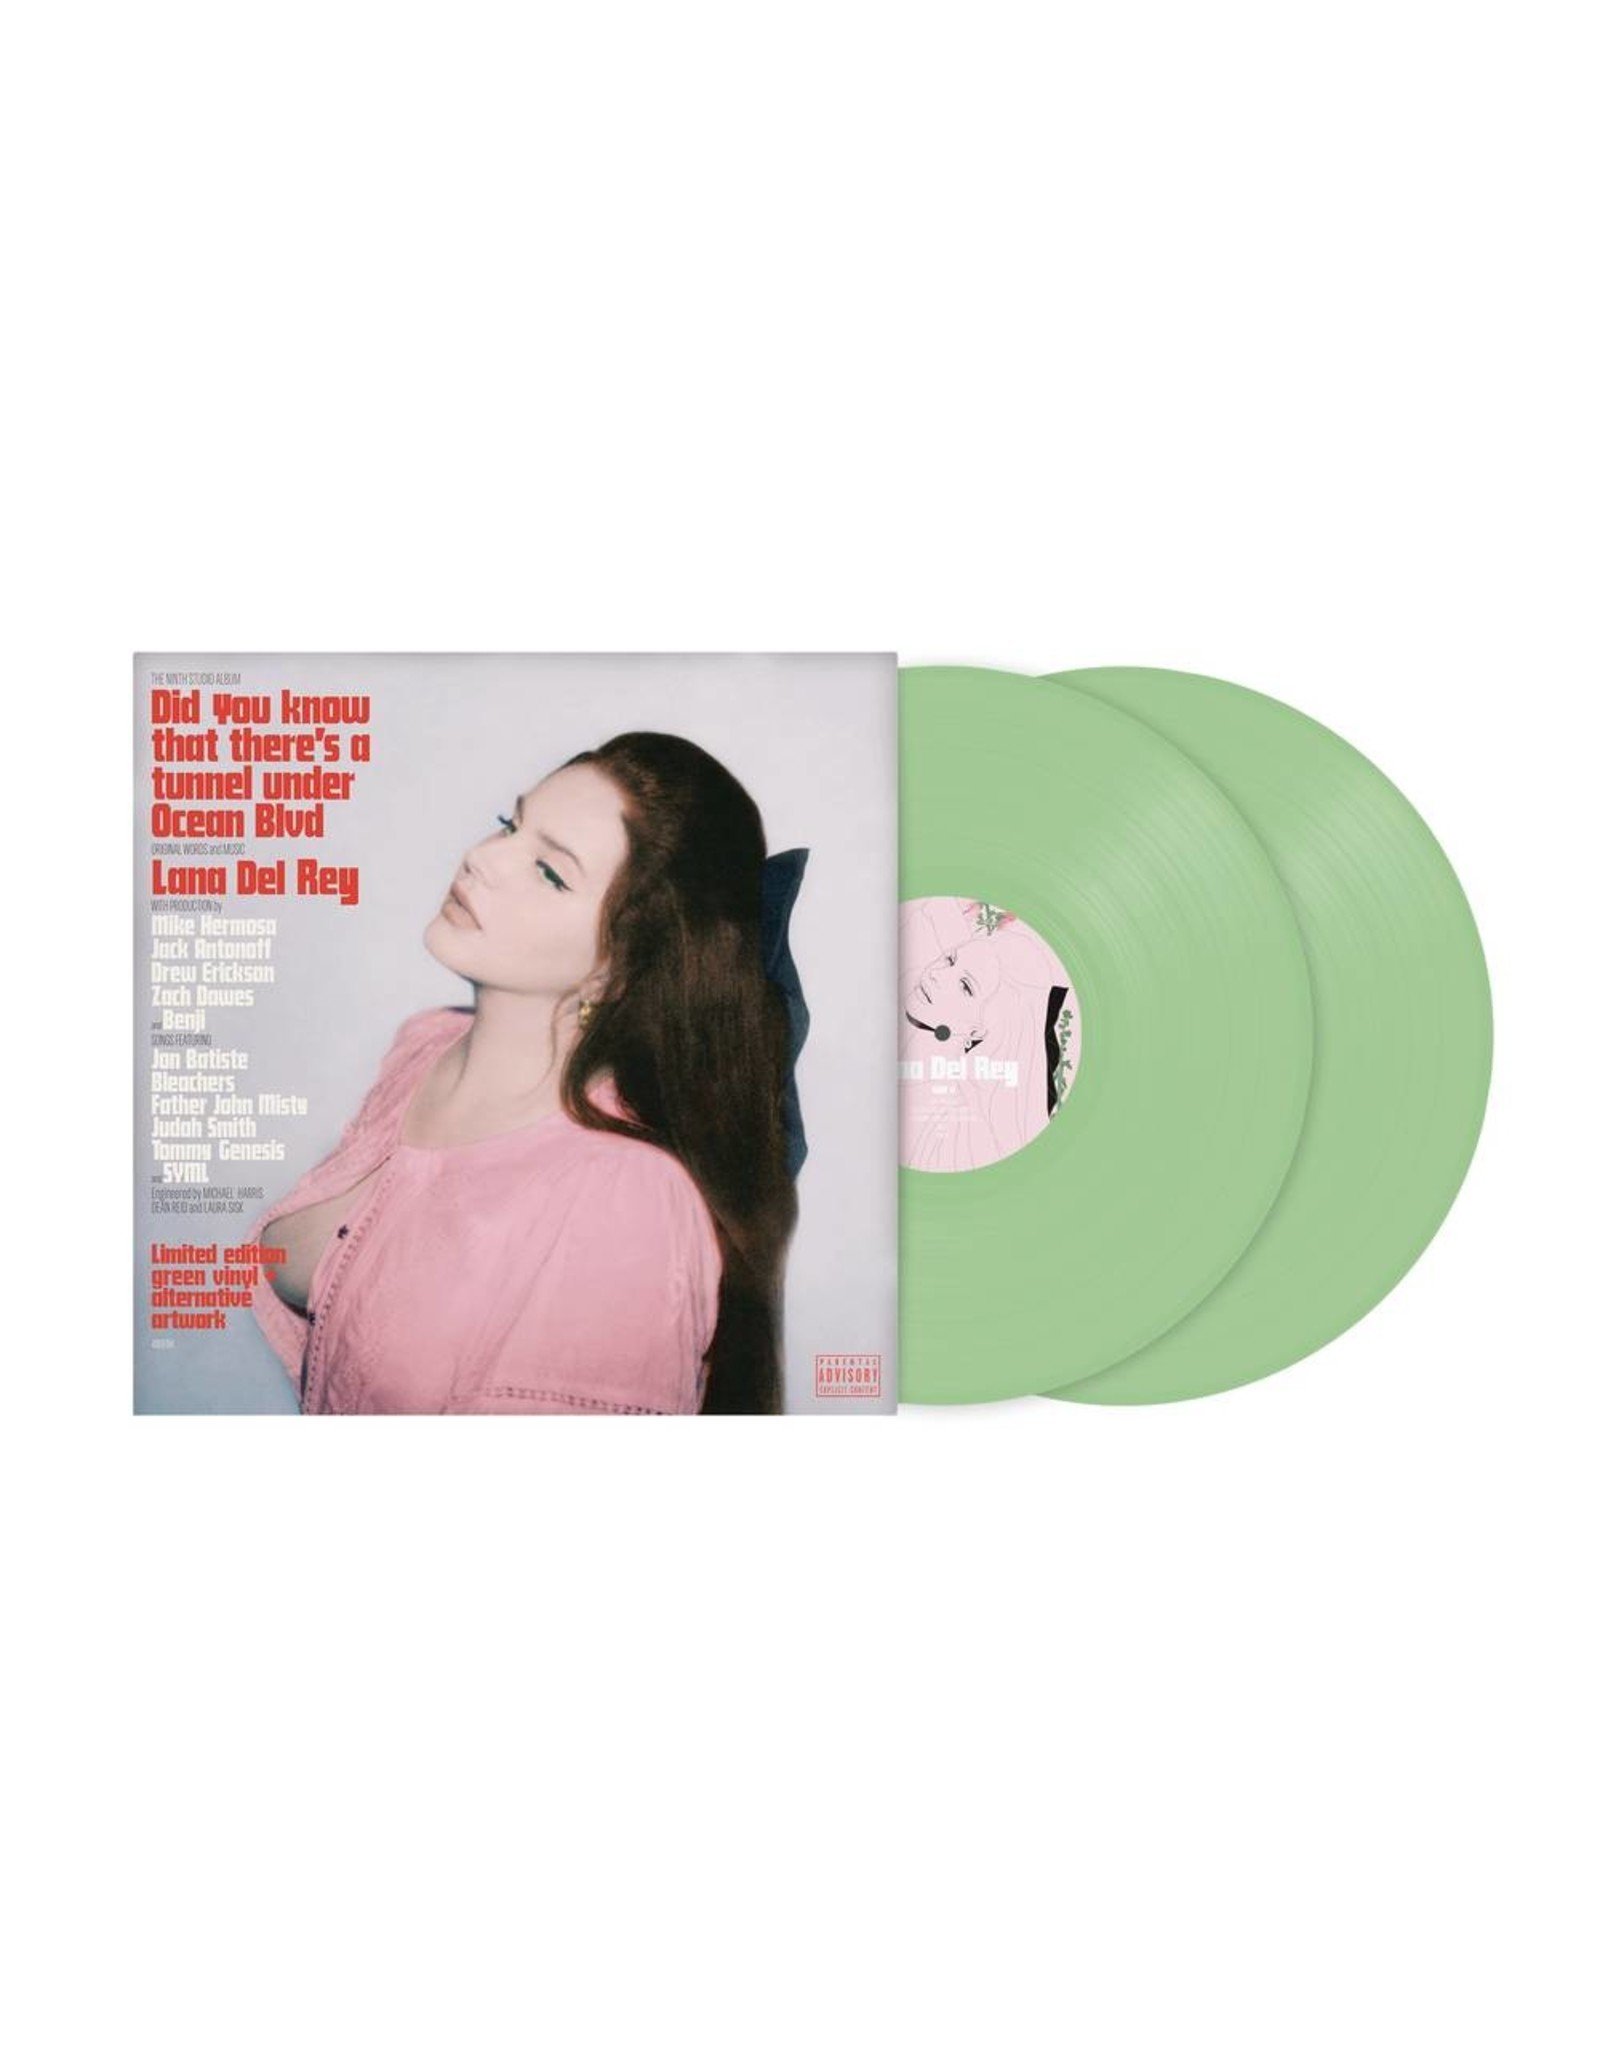 Lana Del Rey - Did You Know That There's A Tunnel Under Ocean Blvd  (Exclusive Green Vinyl)